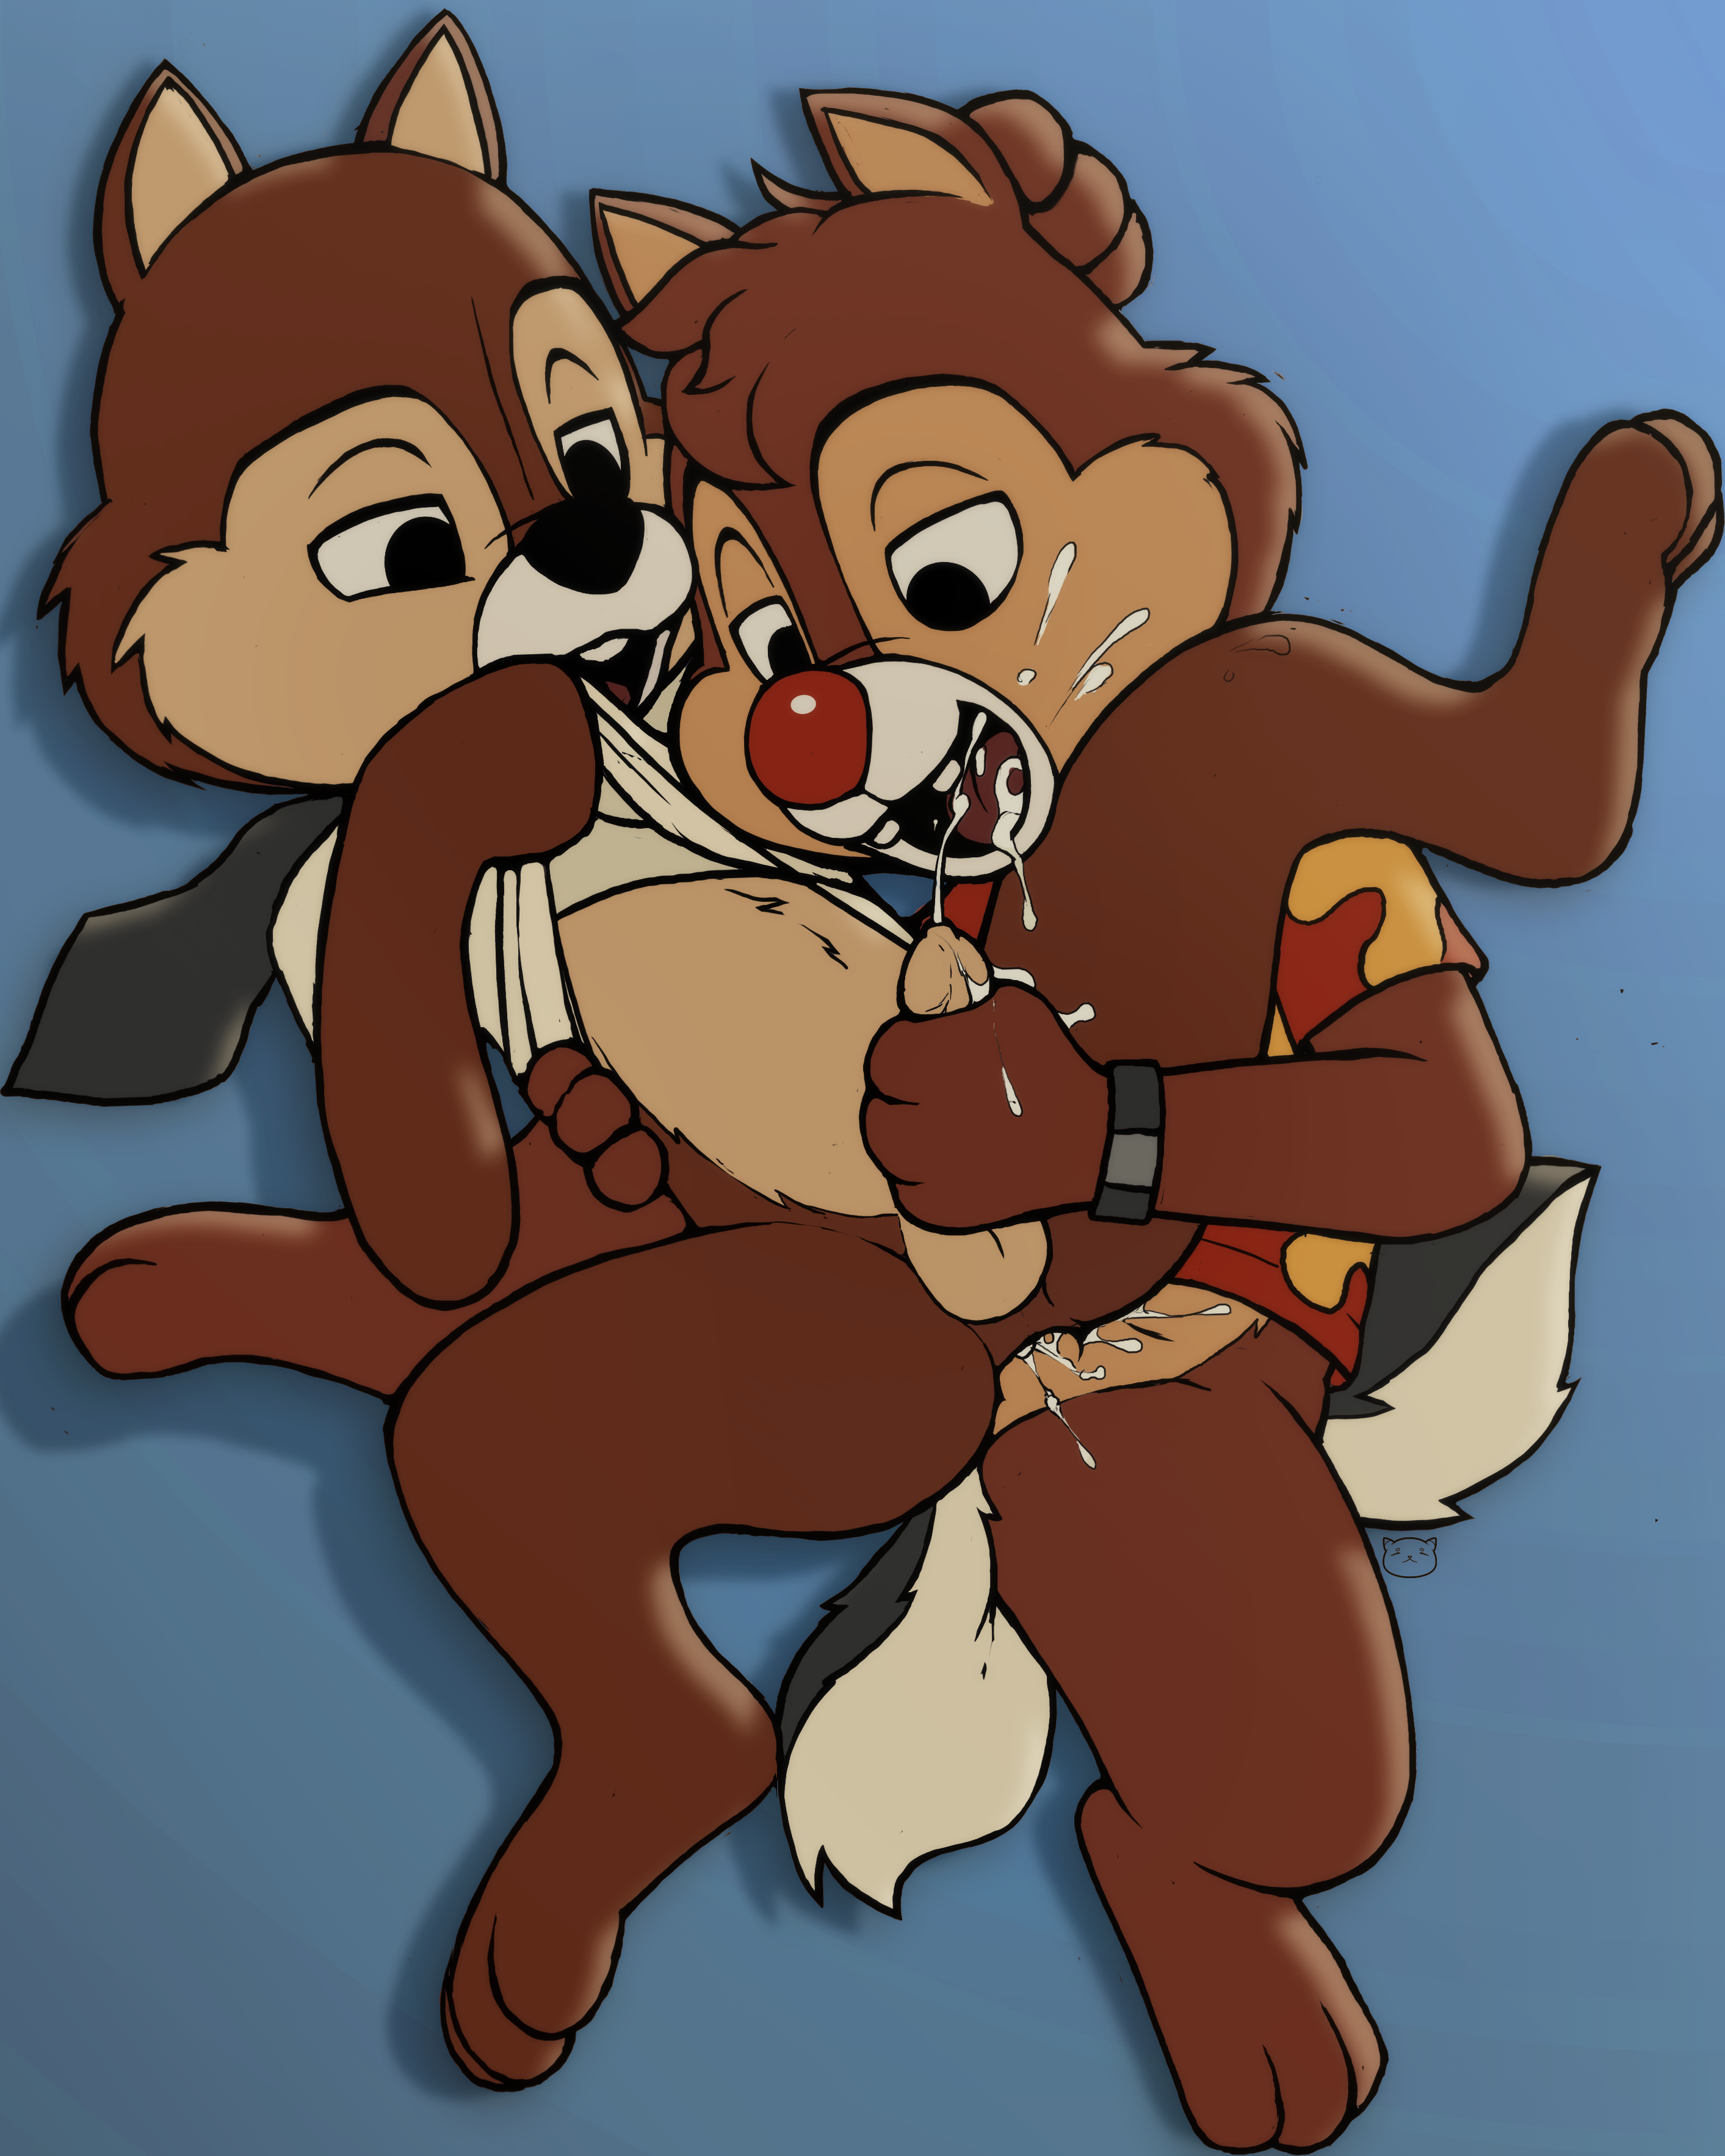 Chip and dale e621